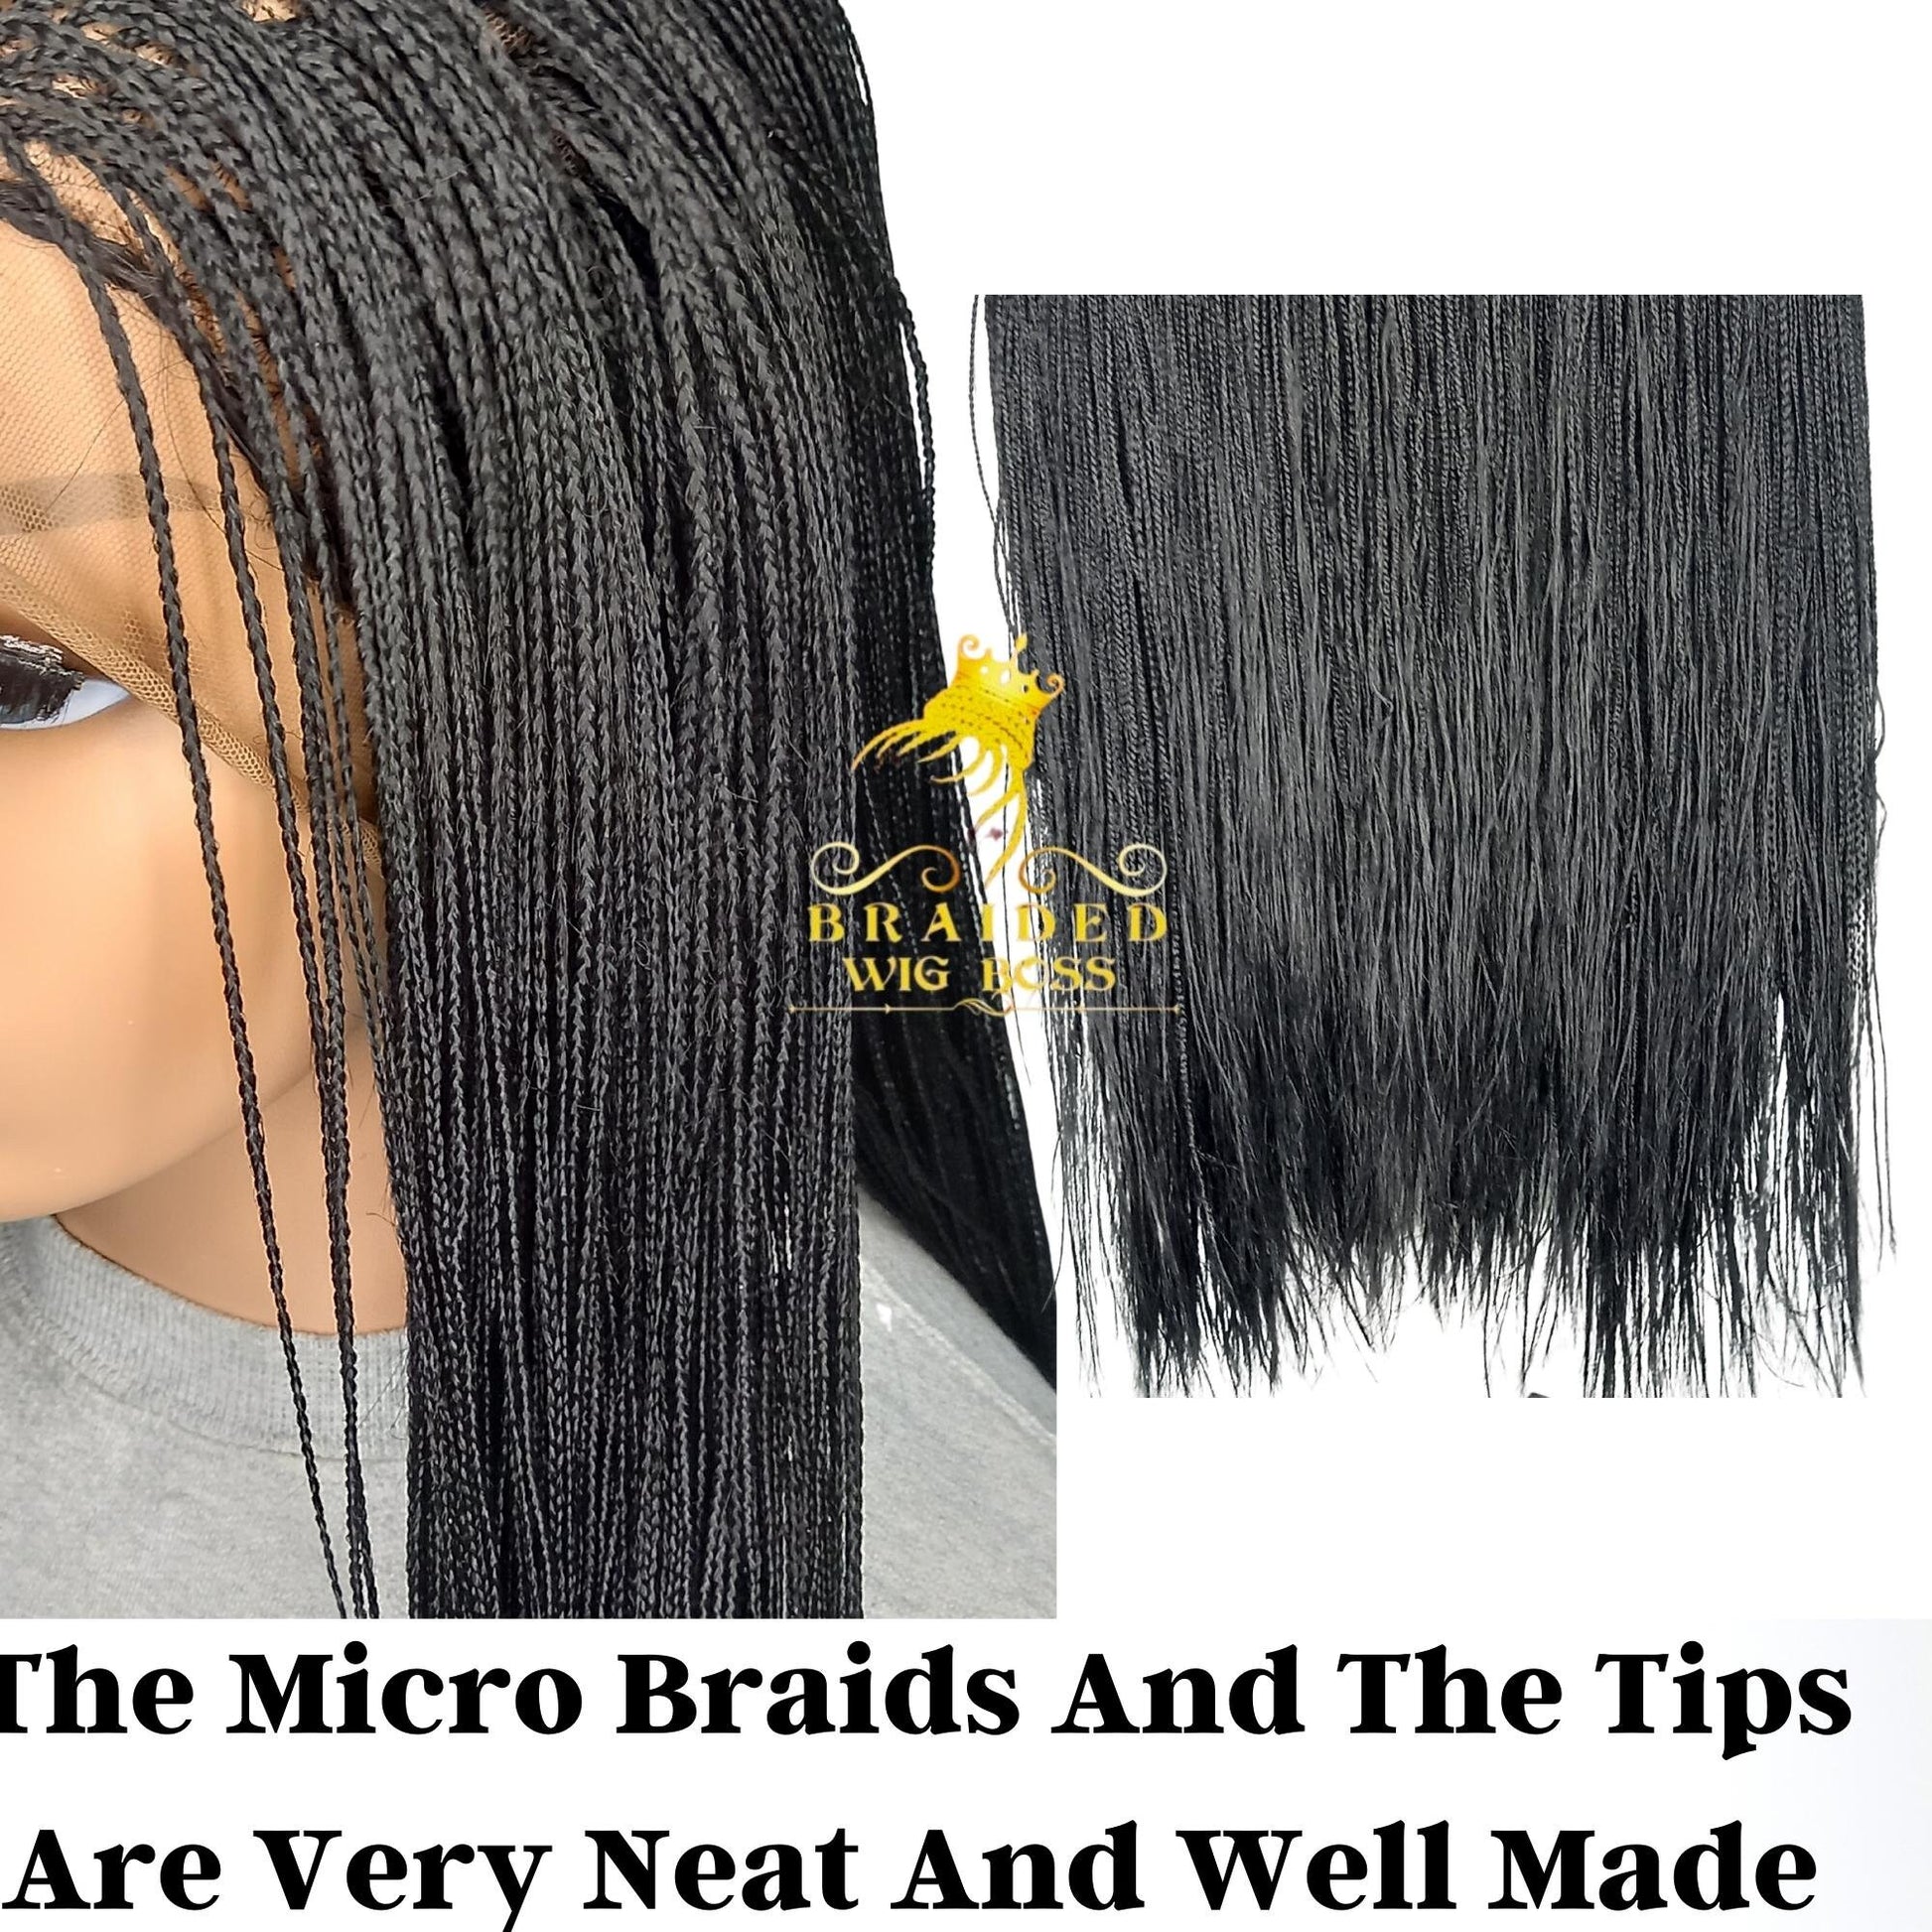 26 Inches Micro Braid Wig on 13*6 Lace Front Wig Color 1 New Synthetic Box Braids Braided Wigs for Black Women With Human Hair Baby Hairs - BRAIDED WIG BOSS